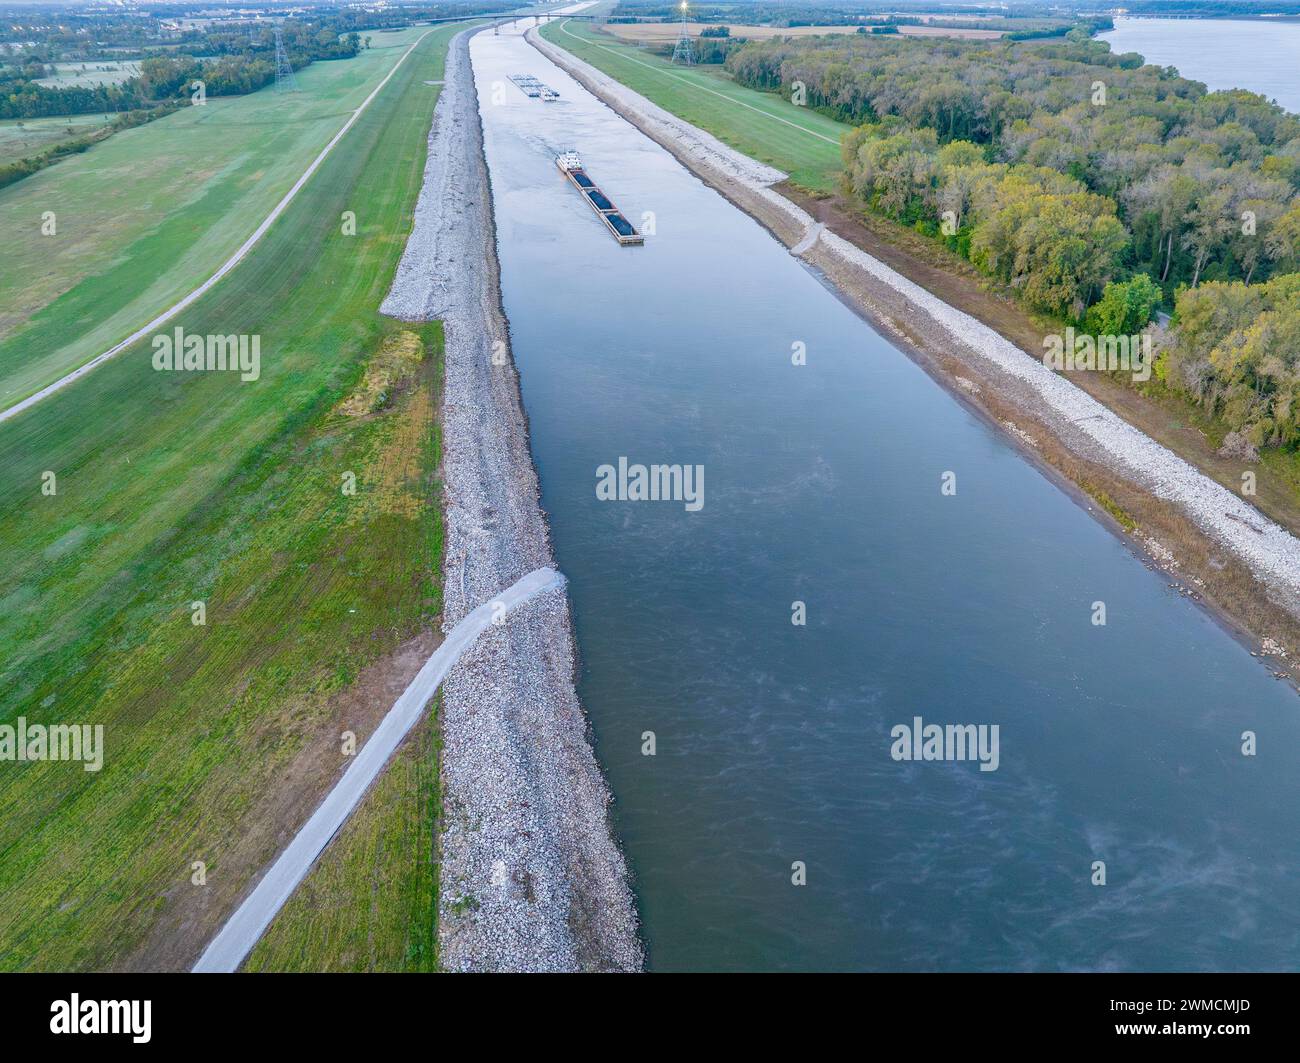 towboats with barges on Chain of Rock Canal of Mississippi River above St Louis, aerial view in October scenery Stock Photo